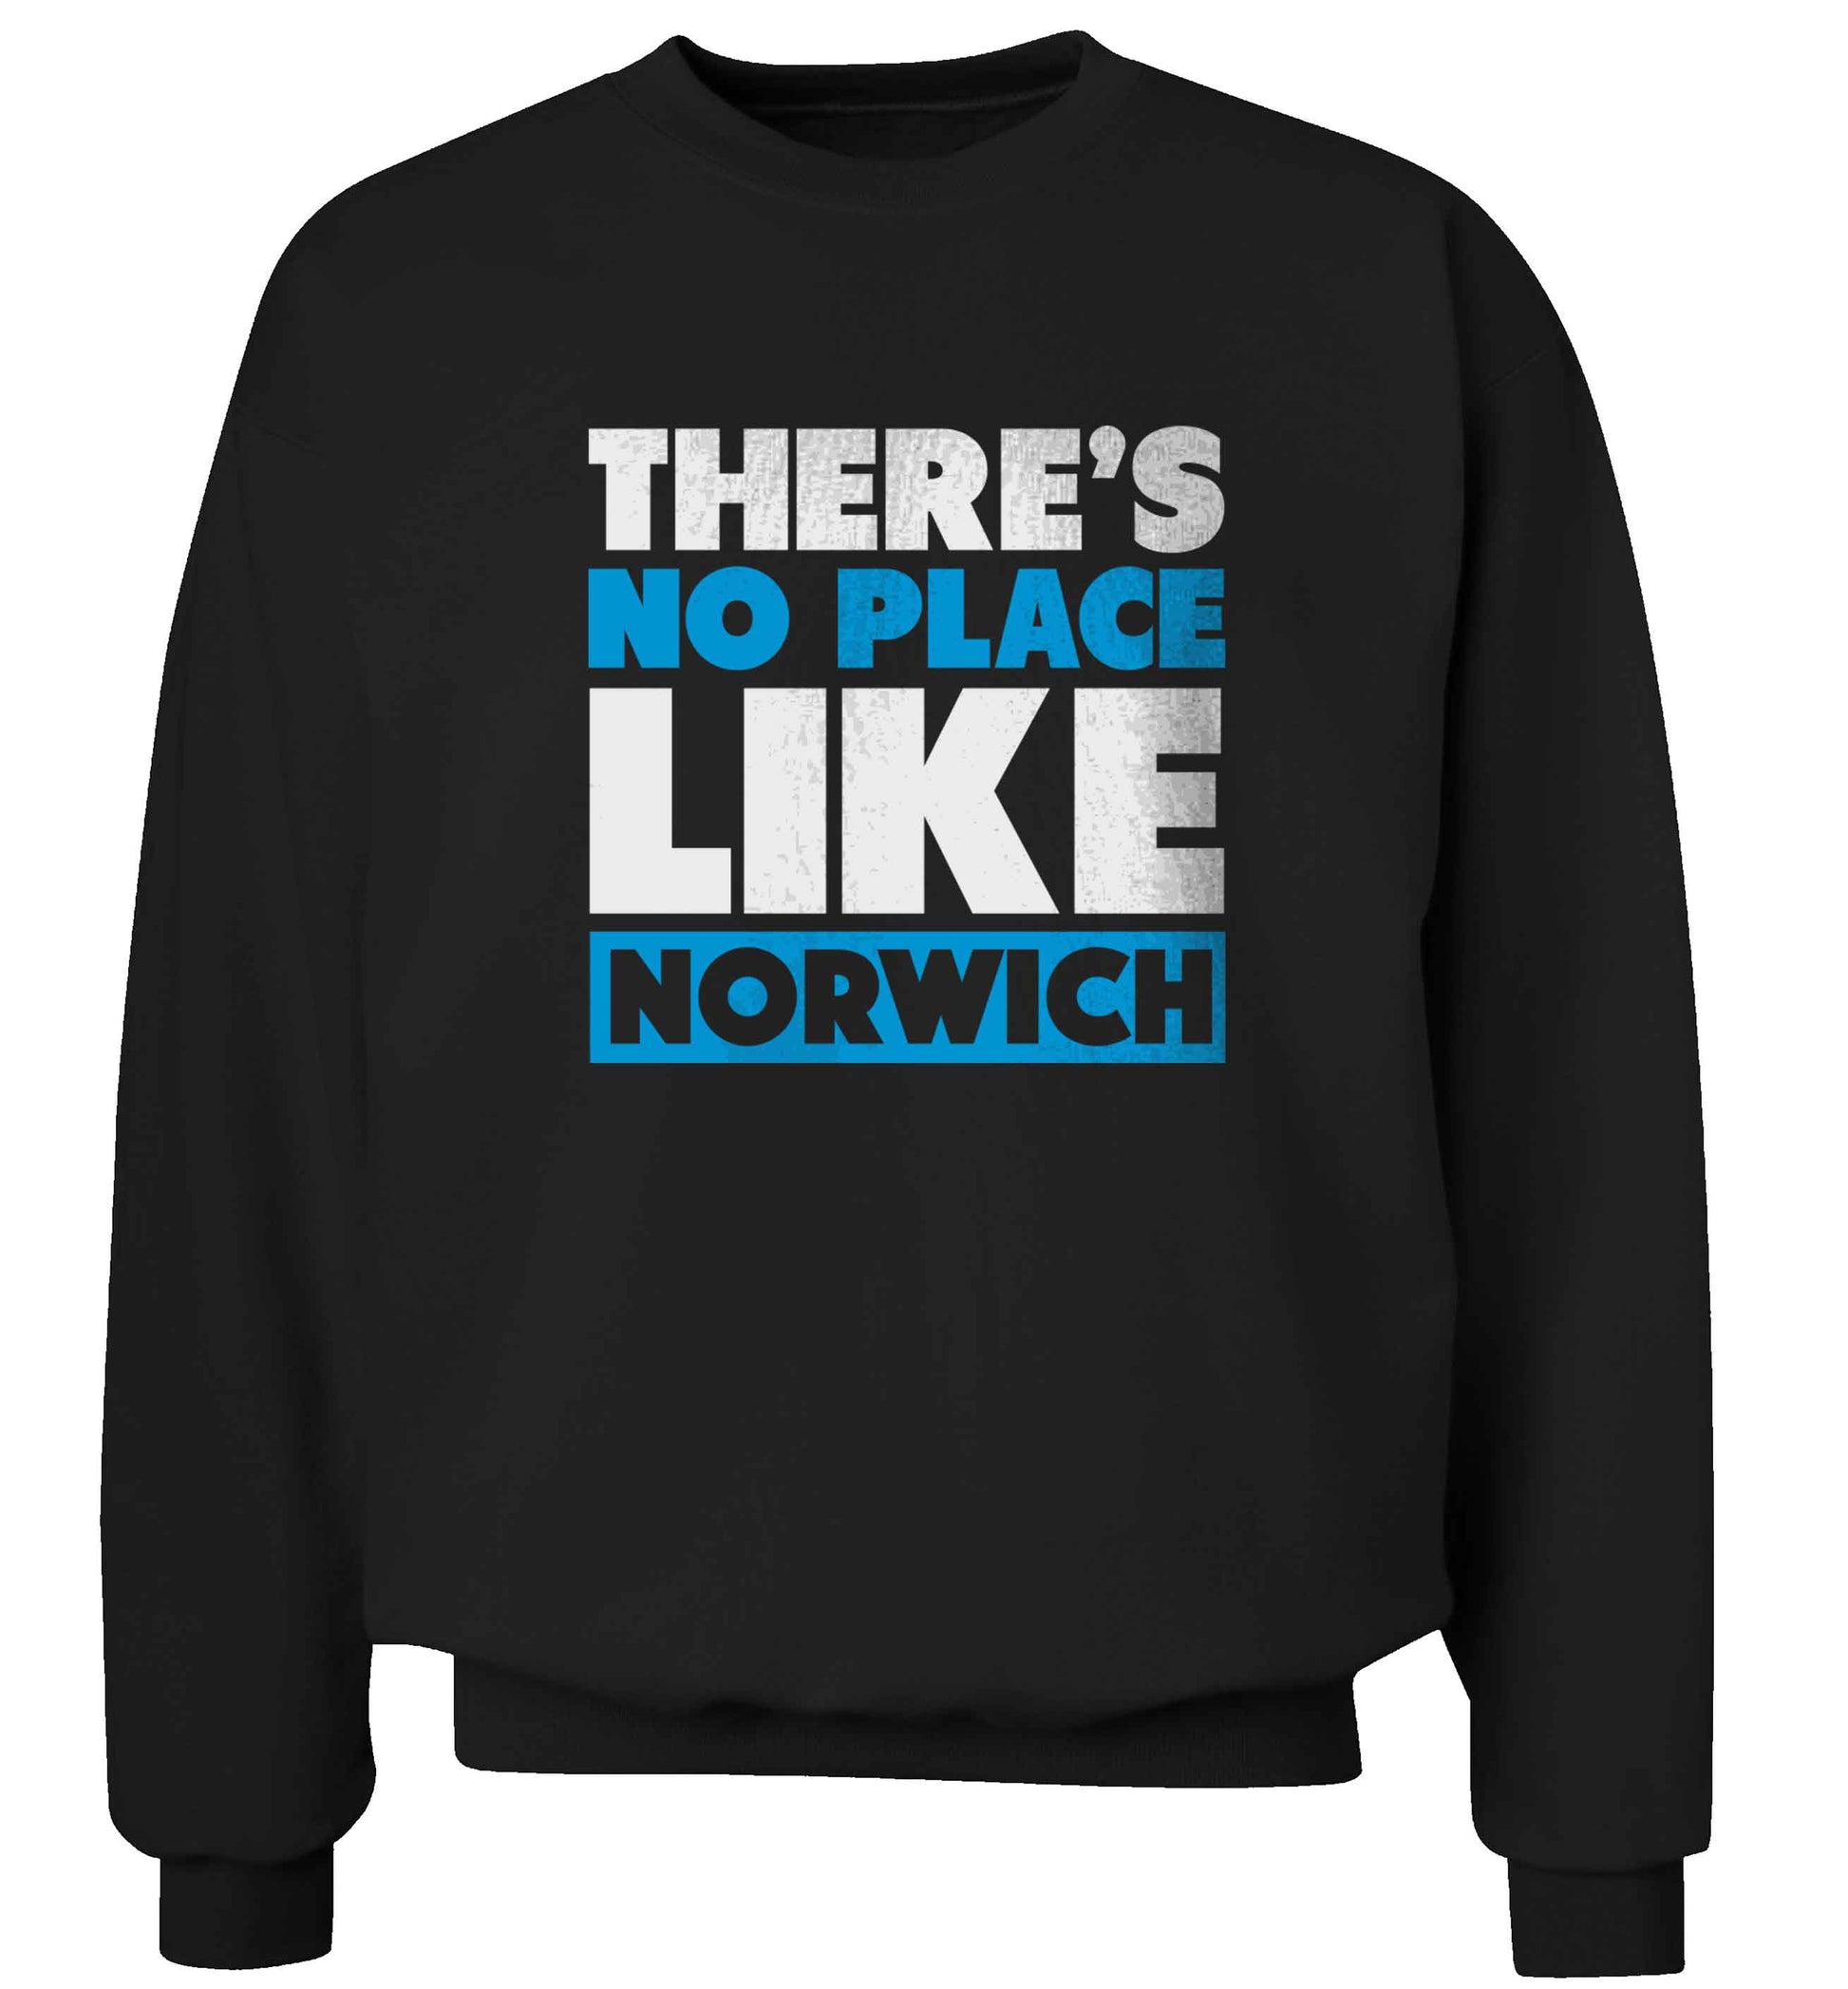 There's no place like Norwich adult's unisex black sweater 2XL